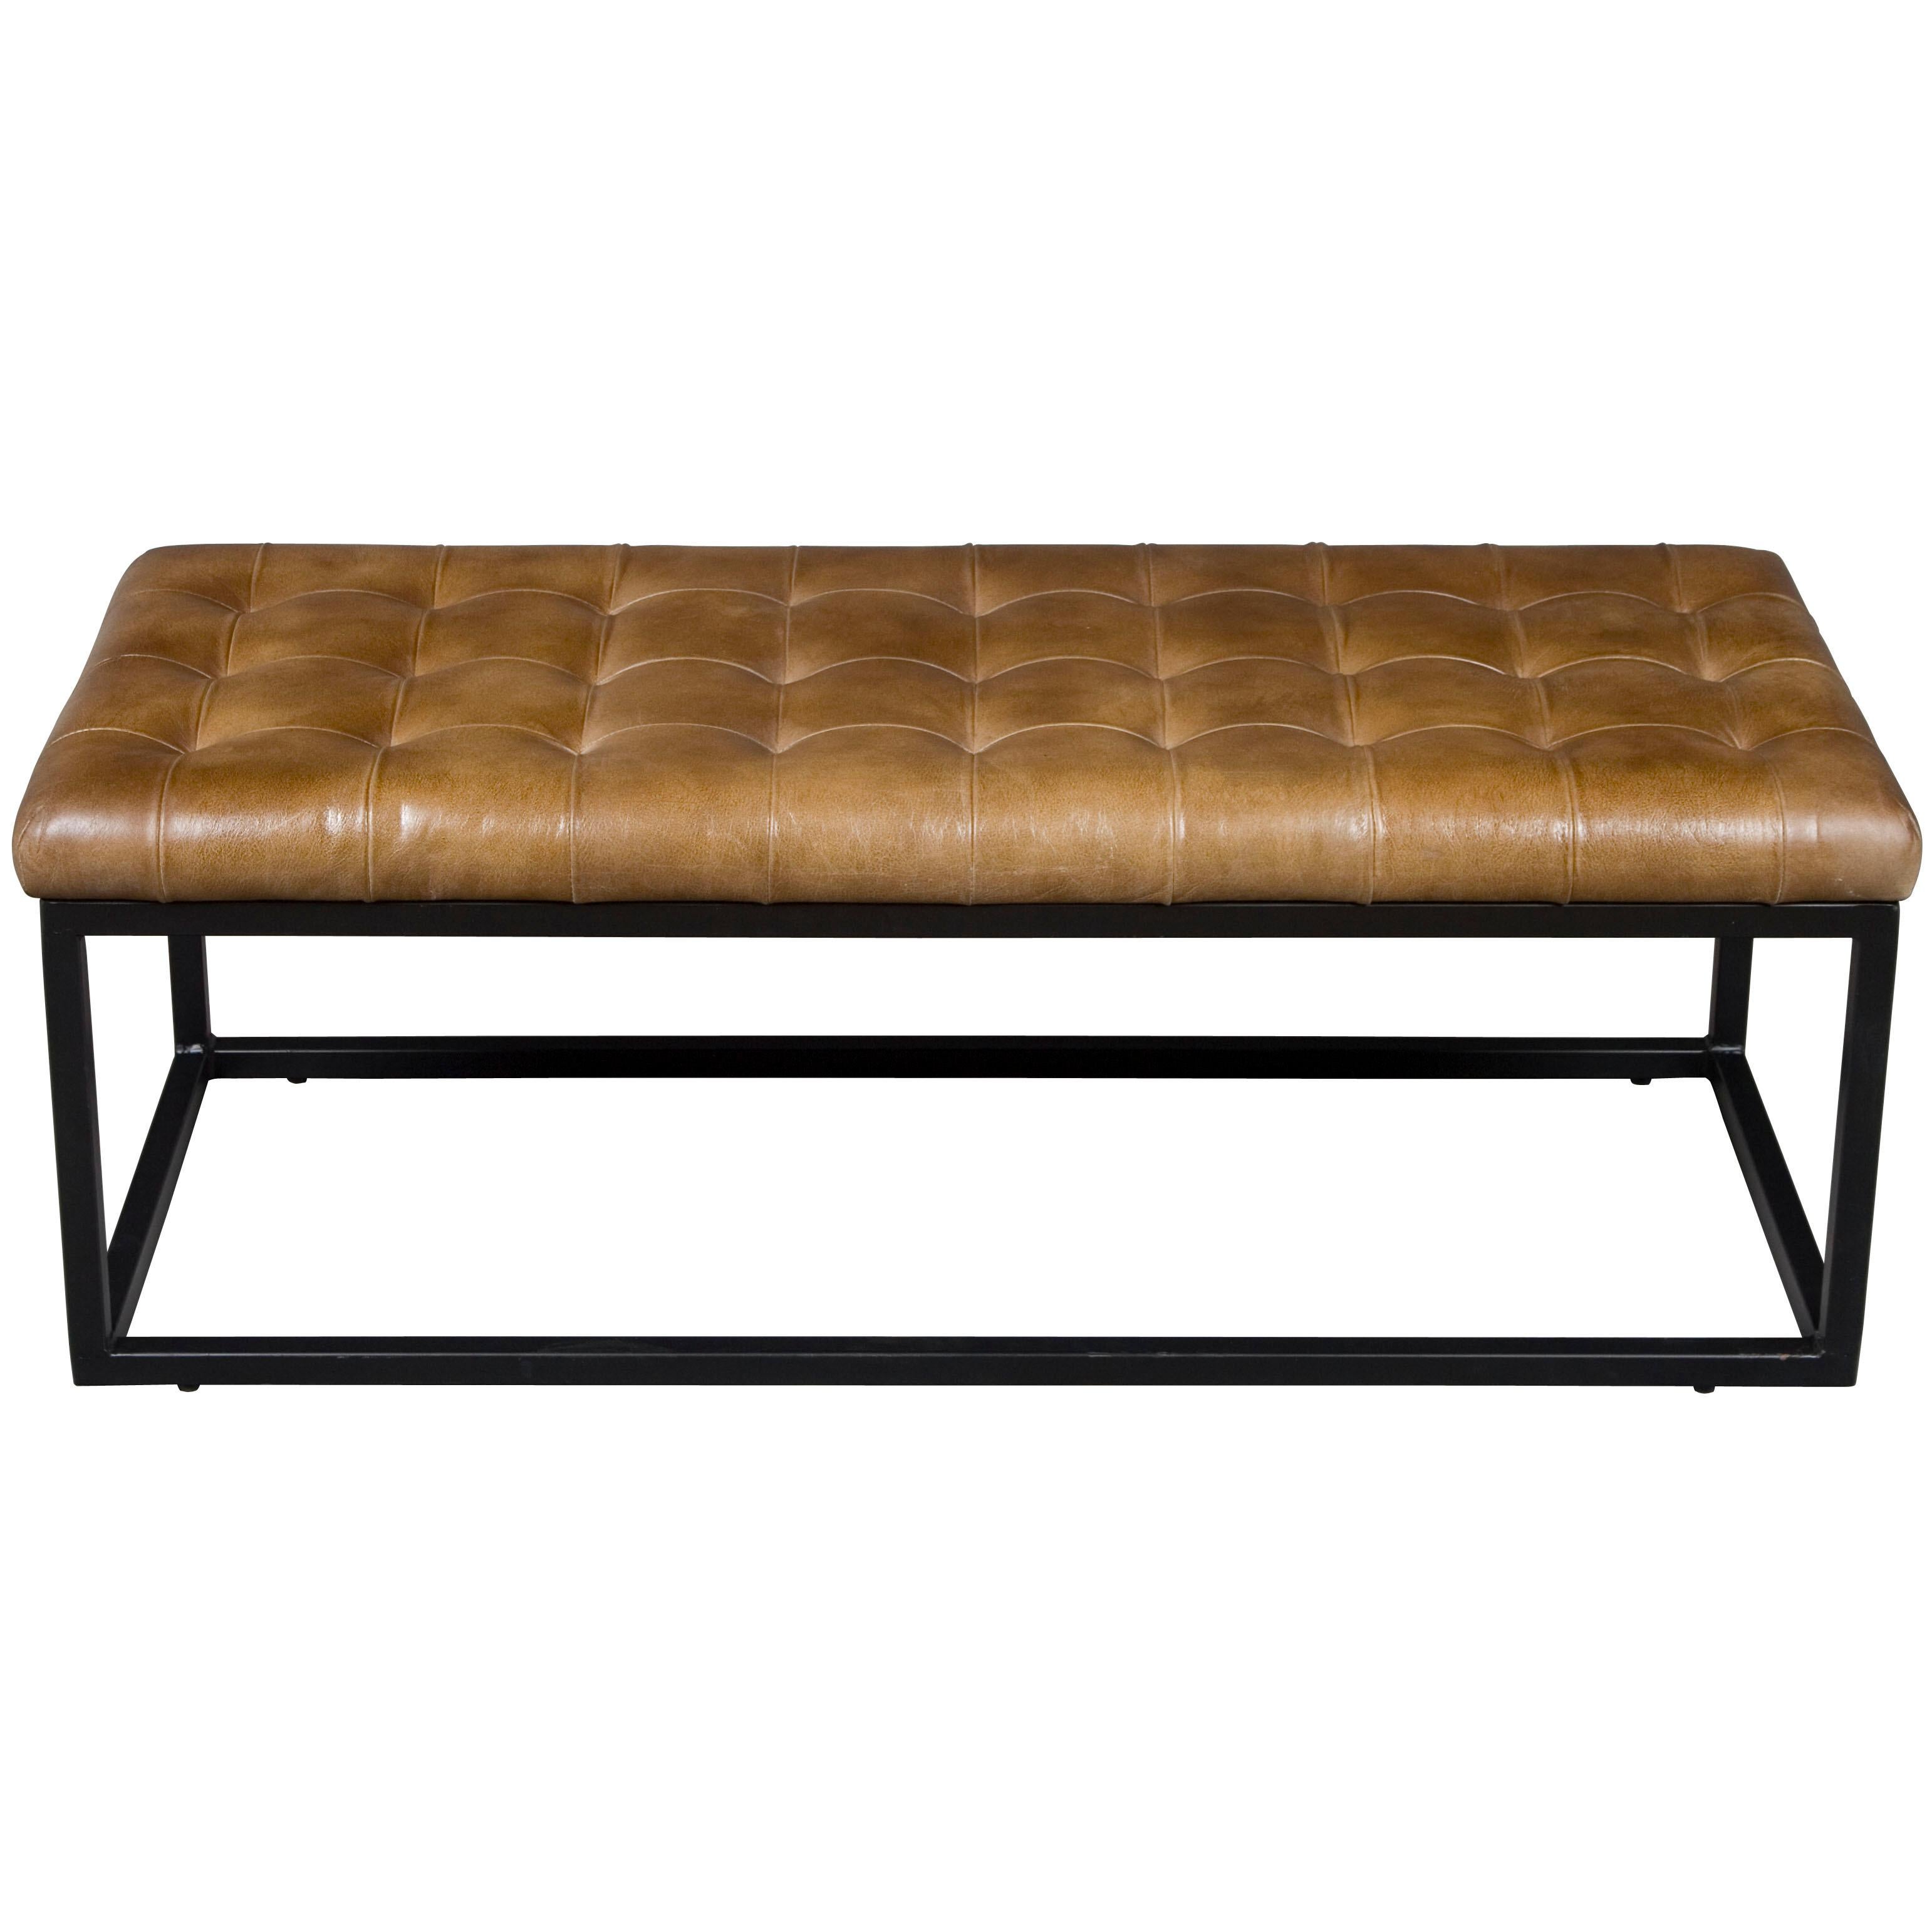 English Tufted Leather Bench Seat Ottoman on Metal Base For Sale